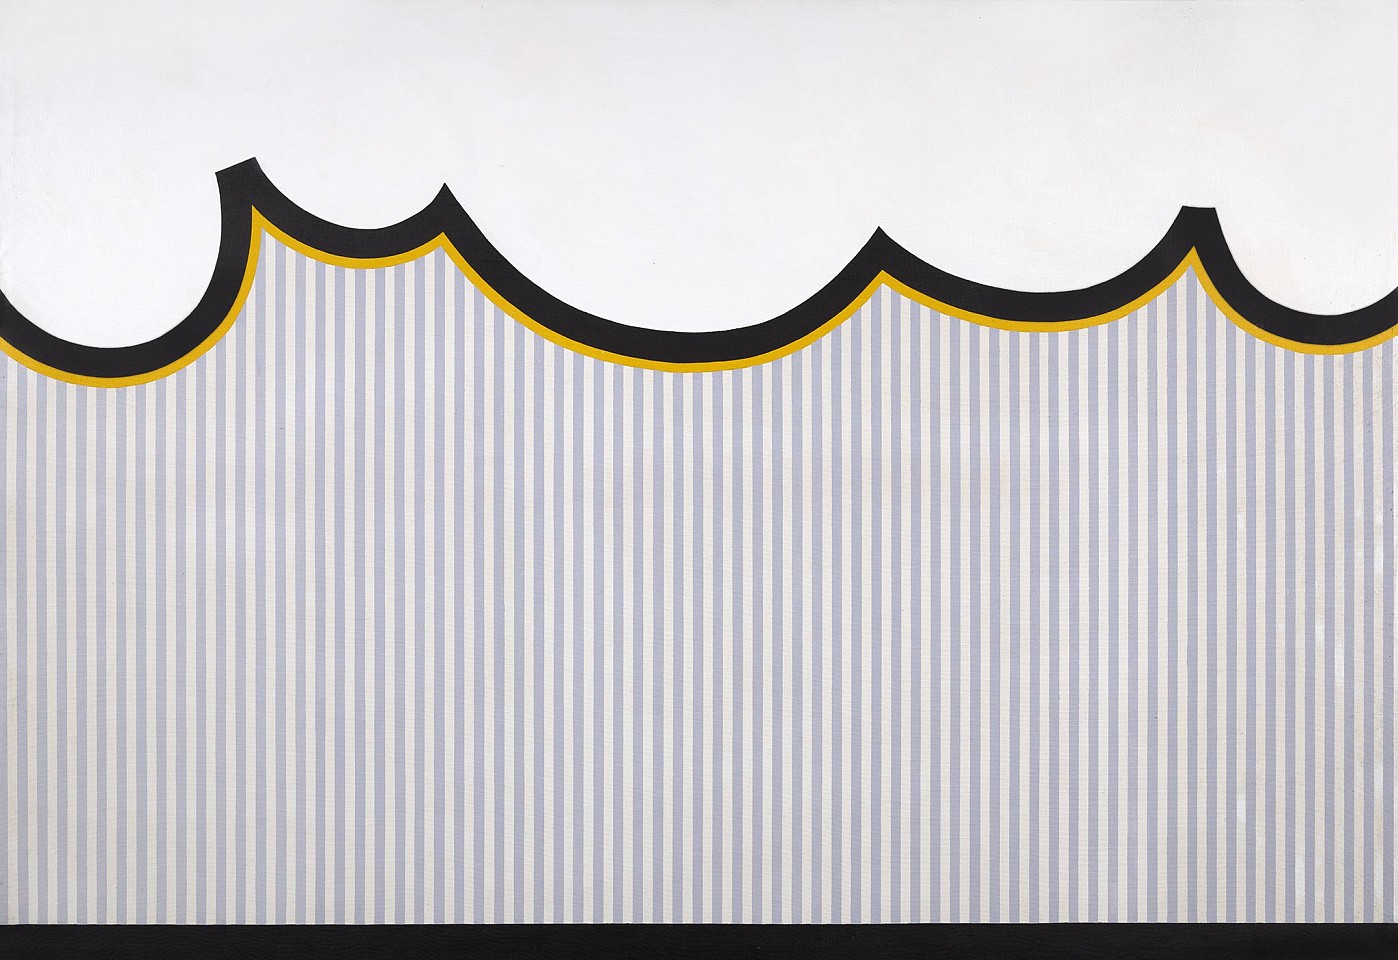 Mary Dill Henry, It Even Rains In California, 1972-73
Acrylic on canvas, 49 1/2 x 71 1/2 in. (125.7 x 181.6 cm)
MHEN-00045